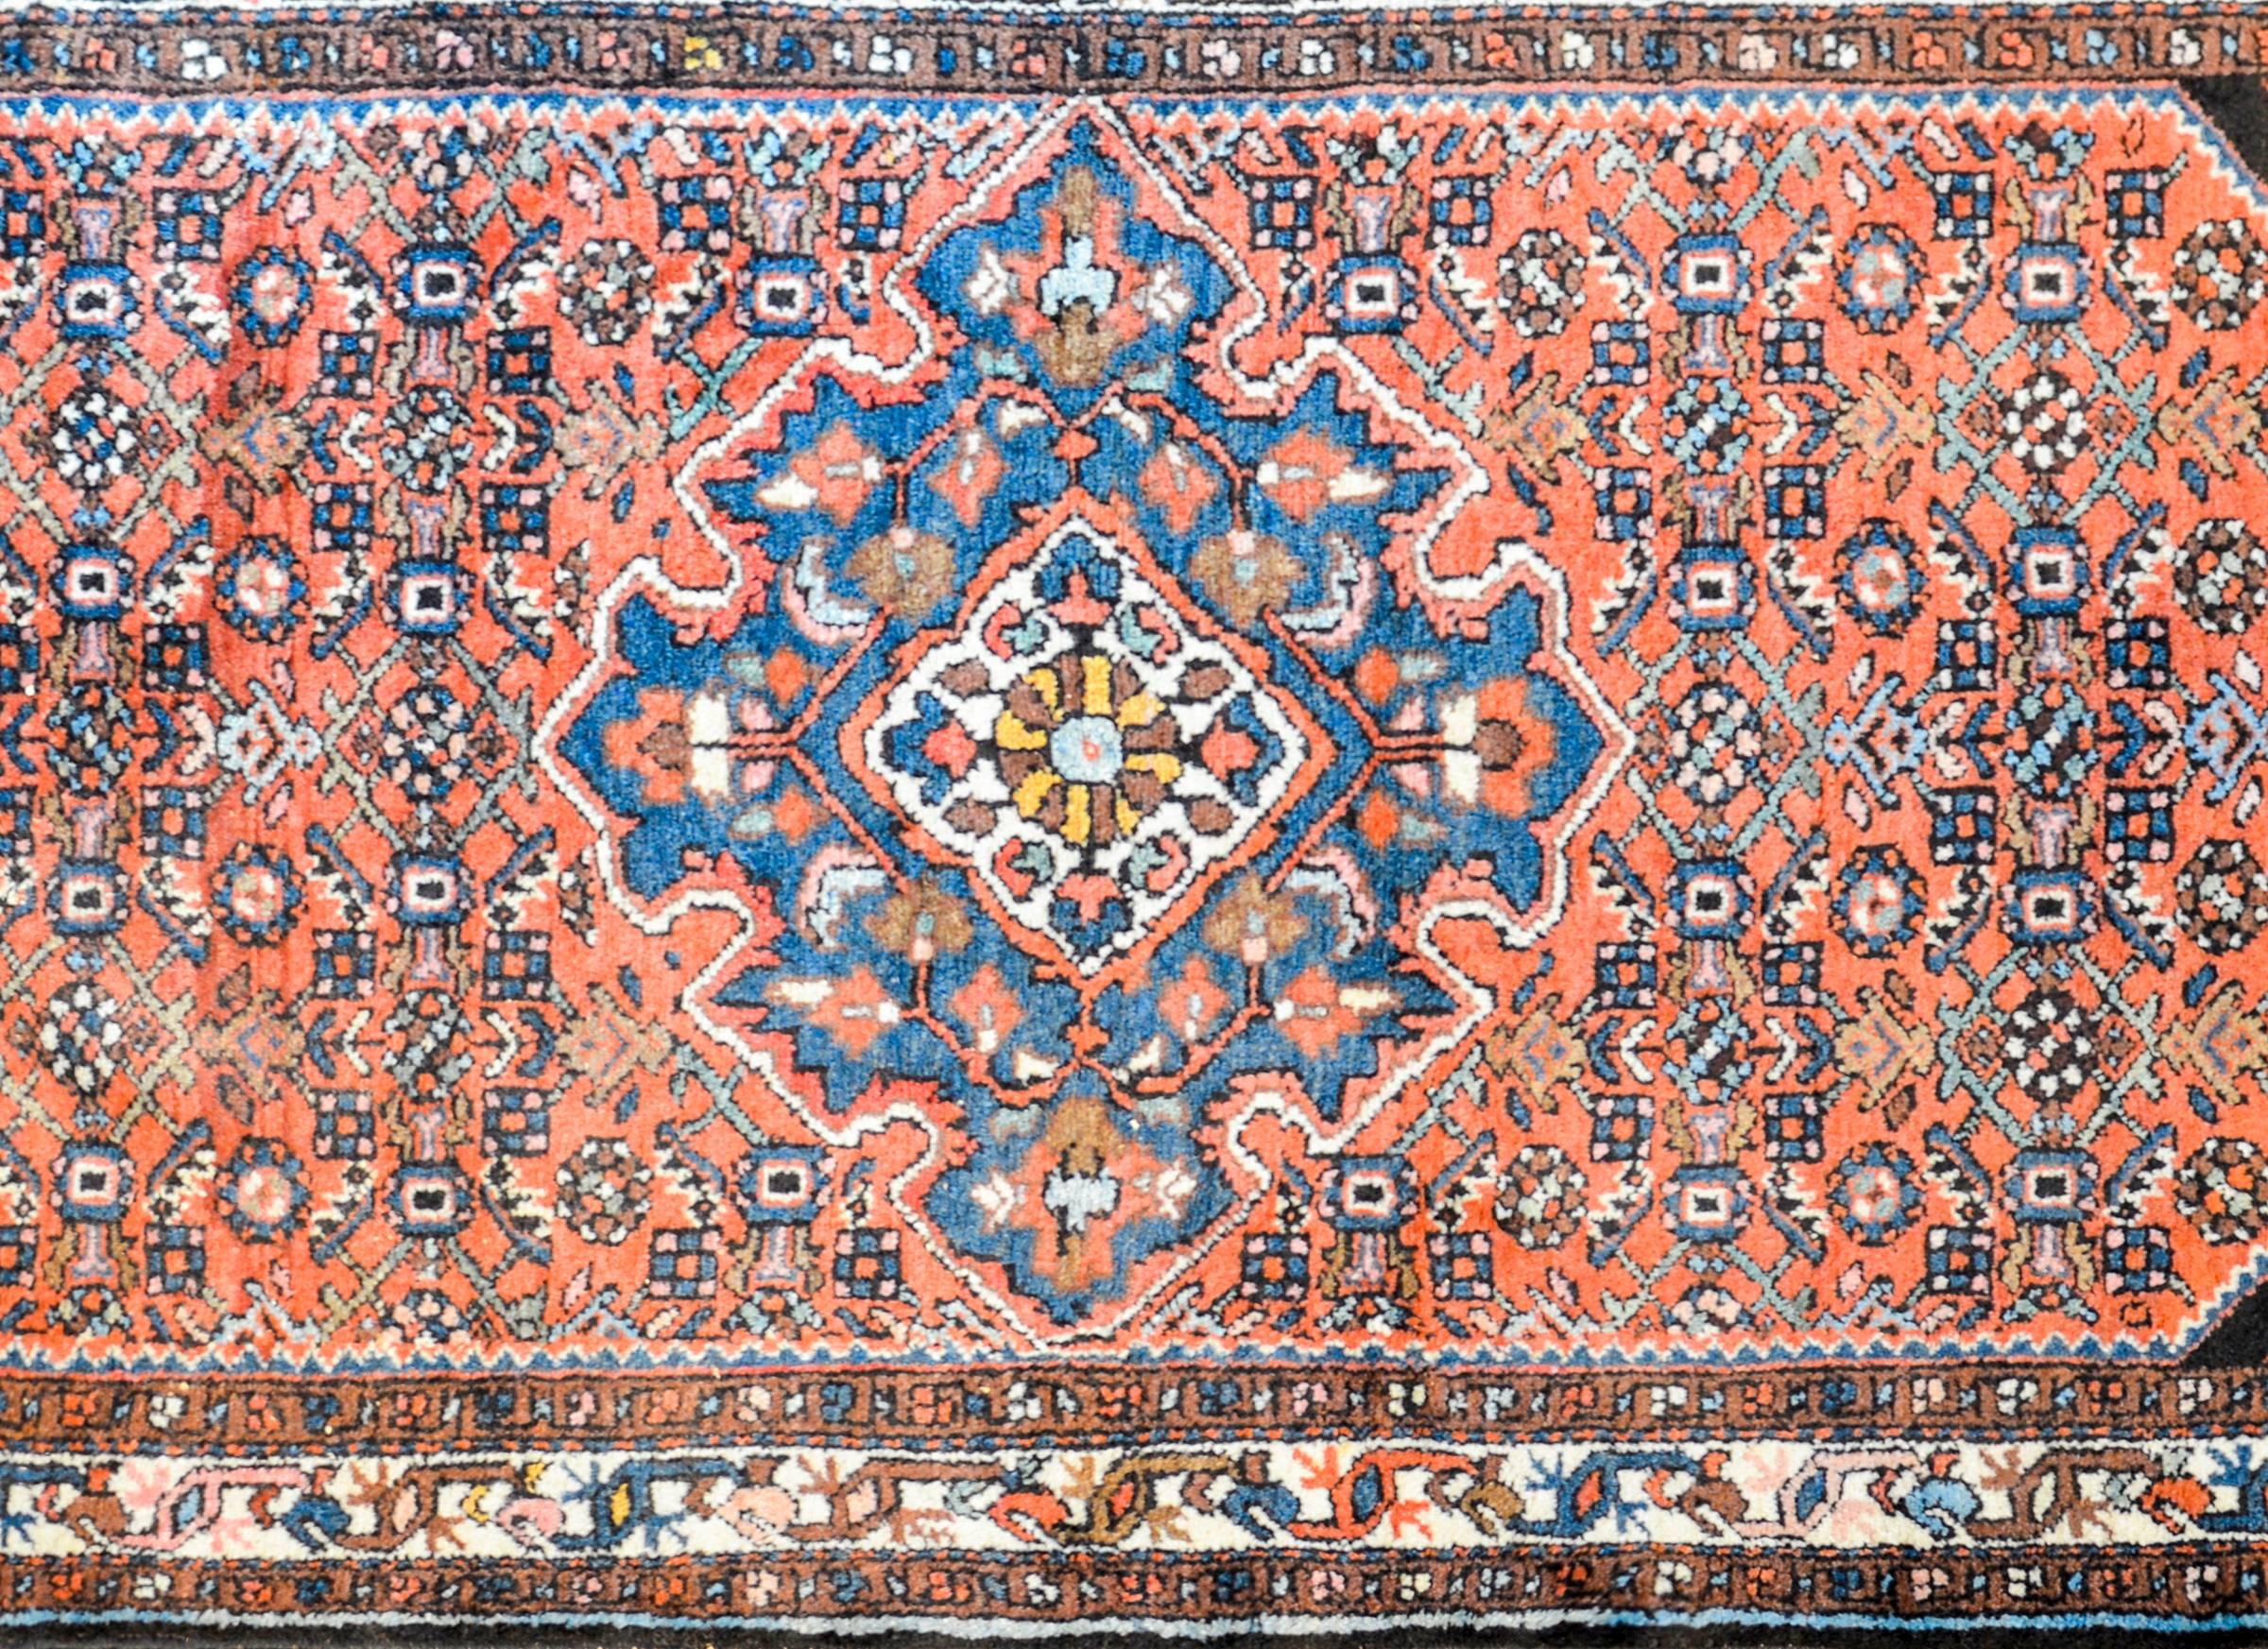 A gorgeous early 20th century Persian Malayar rug with a beautiful central diamond medallion with a an all-over floral pattern. The medallion is surrounded by field of all-over trellis floral pattern woven in indigo and pink, on a crimson